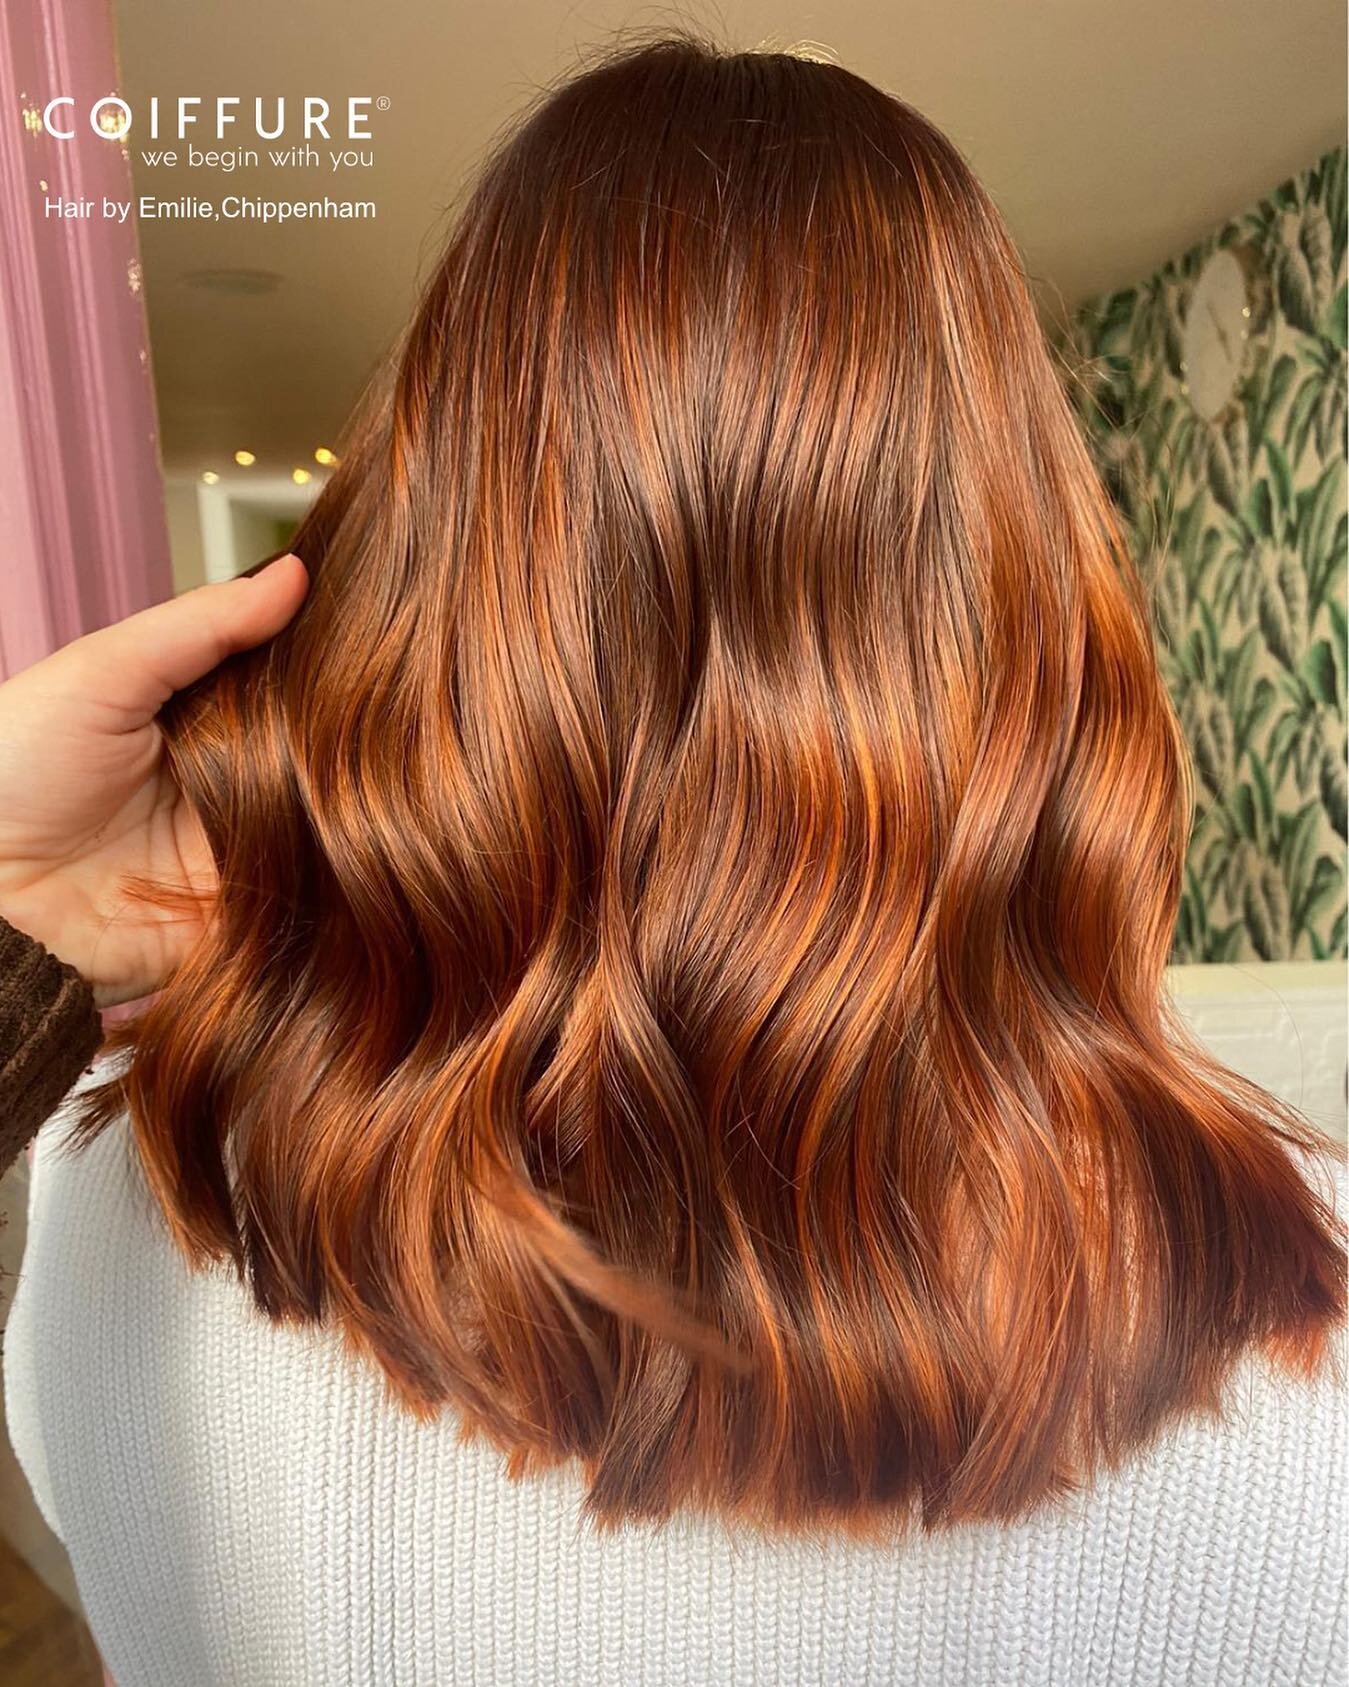 &bull; C H O O S E &bull; T O &bull; S H I N E &bull;

✨ Well, I think this one speaks for itself 👏😍

✨ @emilie.coiffurehairdressing at Coiffure Chippenham, has been mixing up some stunning copper formulas to create this beauty! 

✨ Fancy a change?